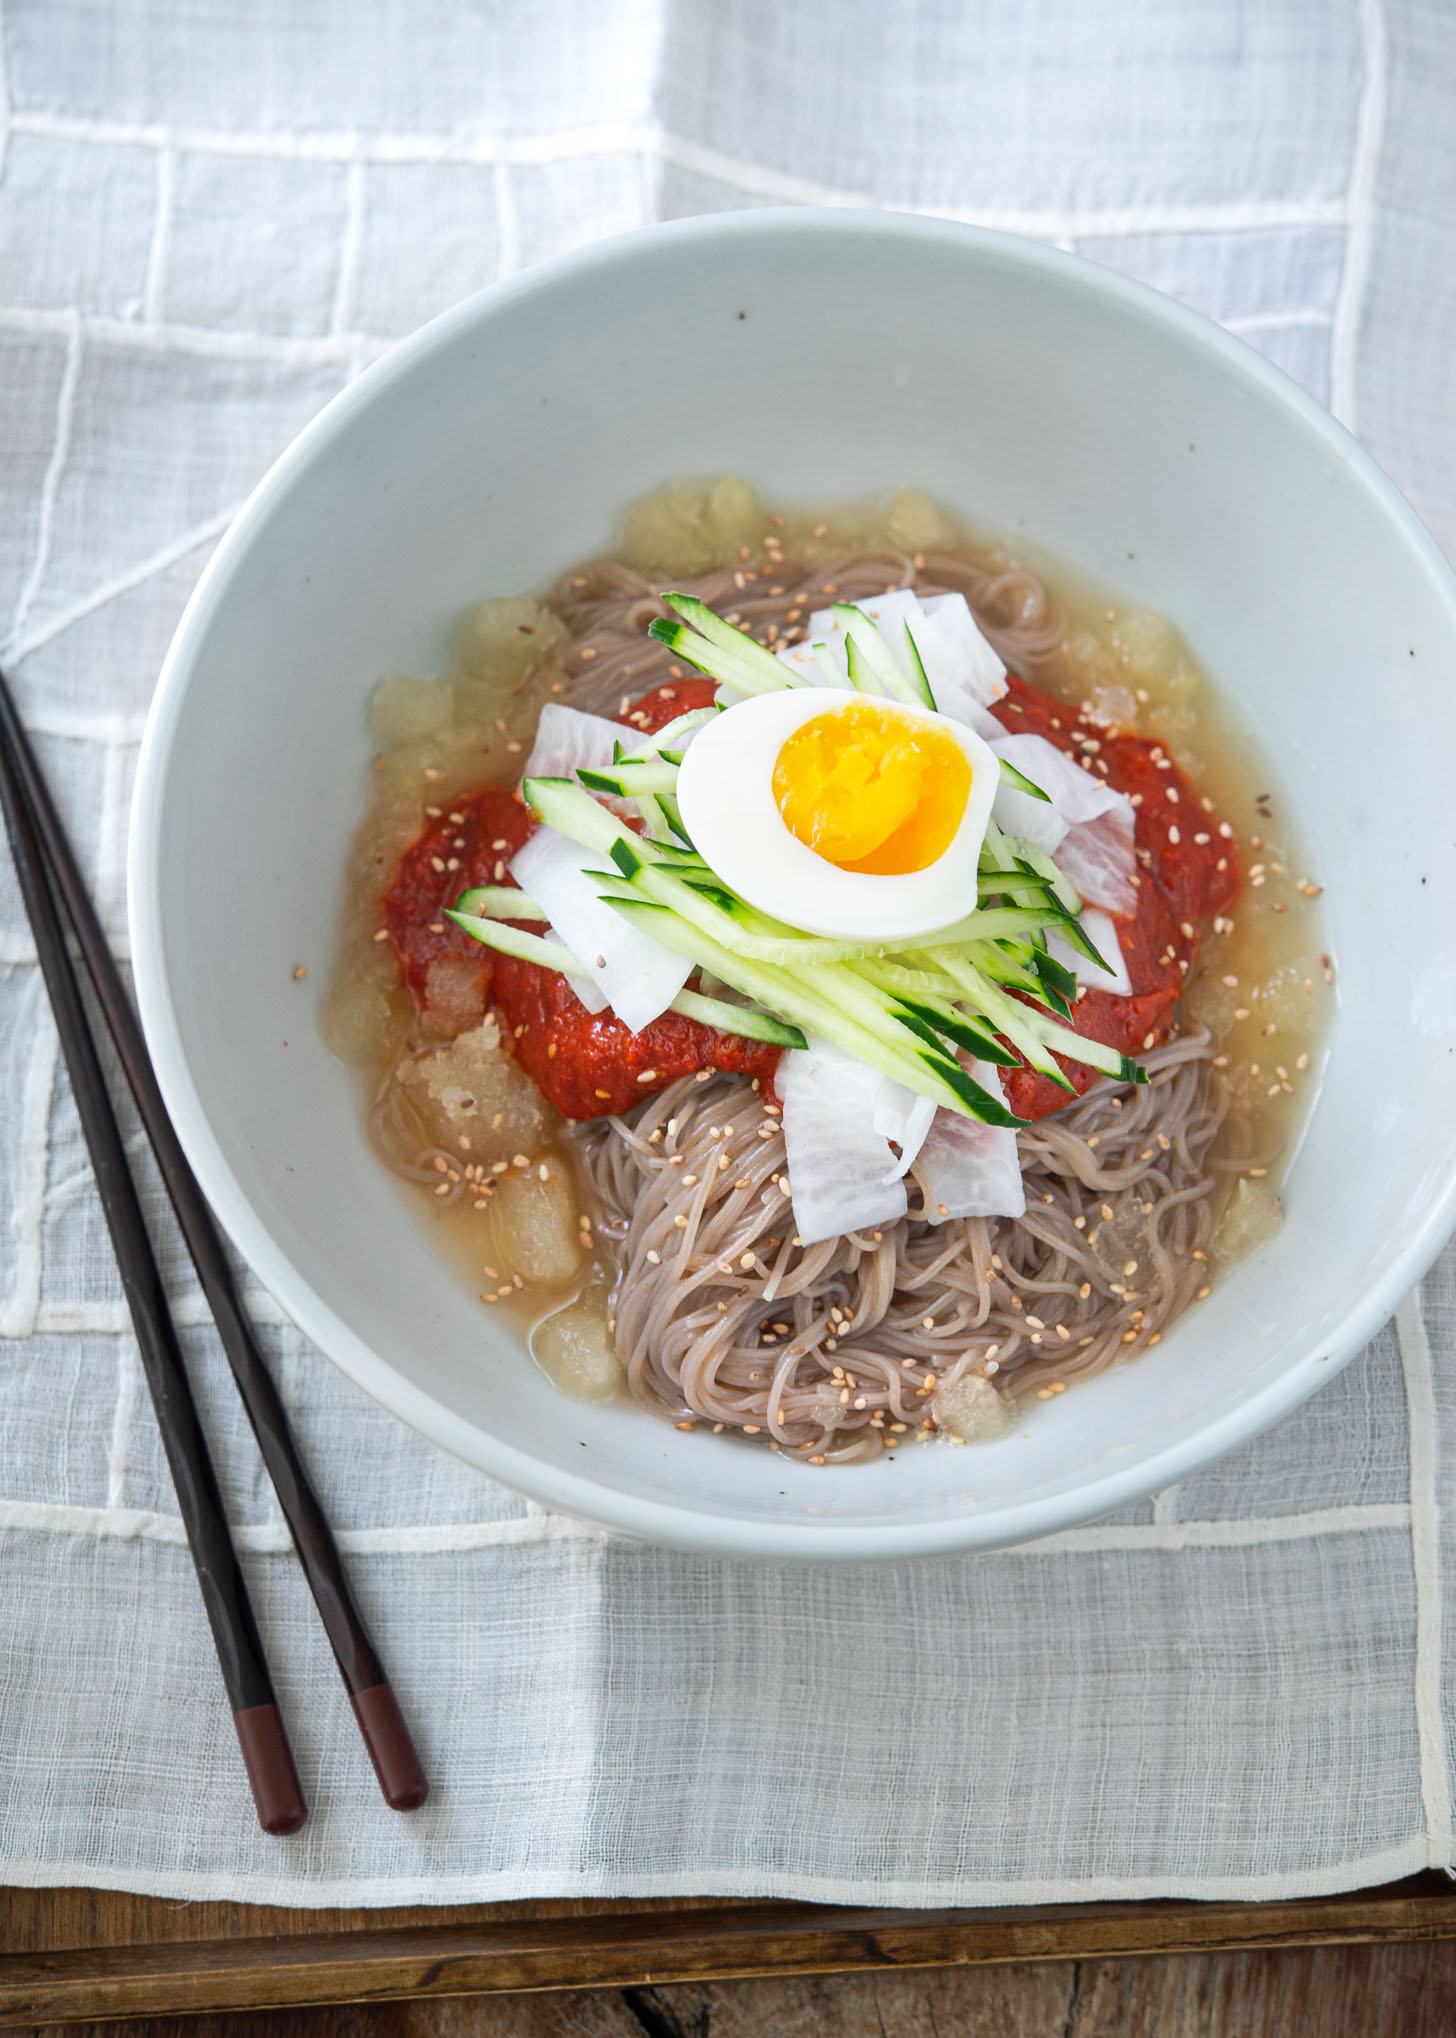 Bibim naengmyeon (spicy cold noodles) garnished with toppings and beef broth in a bowl.